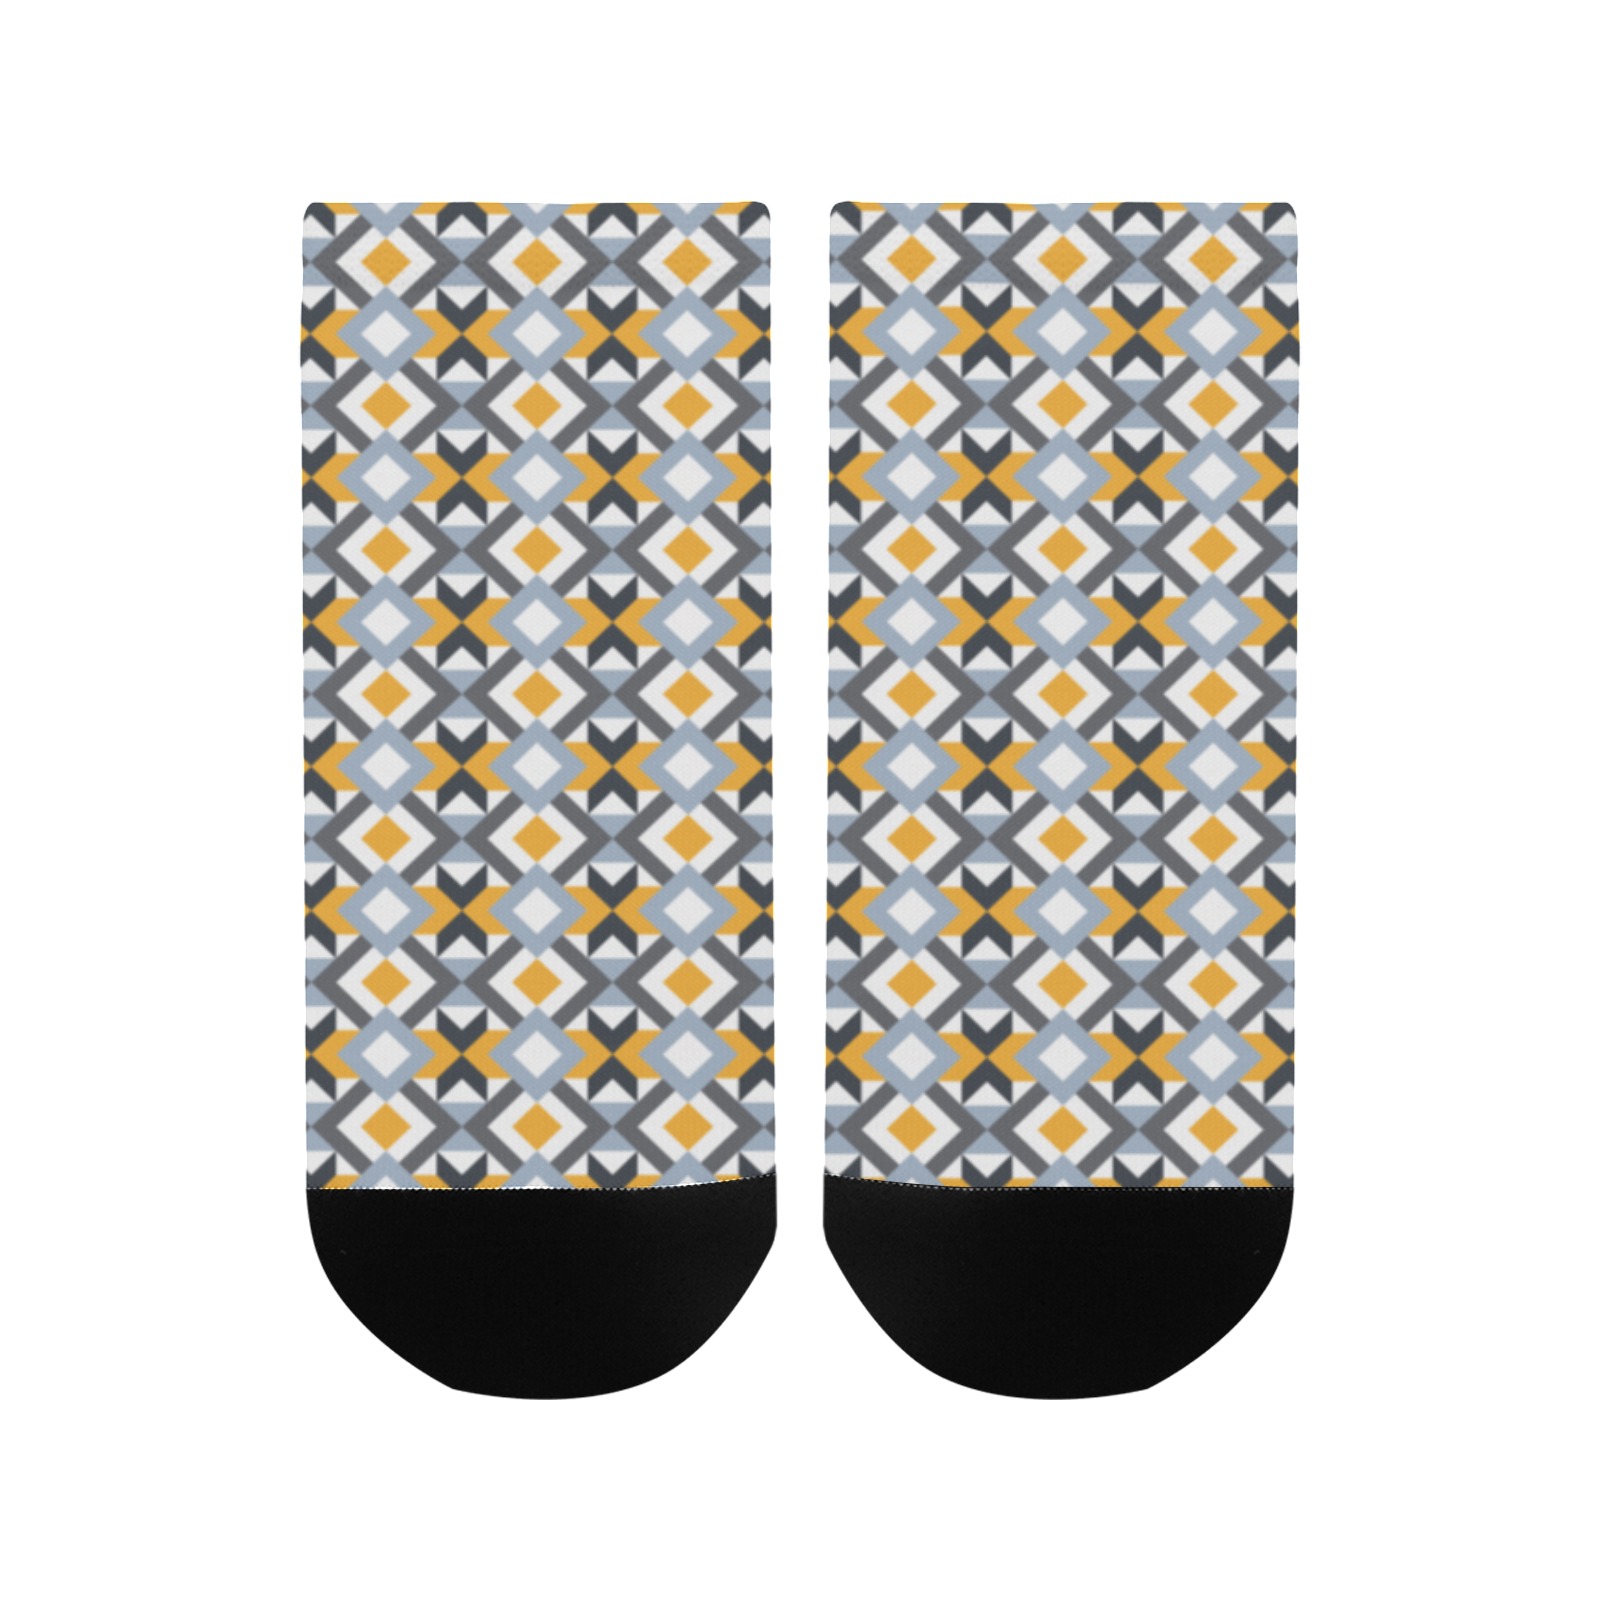 Retro Angles Abstract Geometric Pattern Men's Ankle Socks